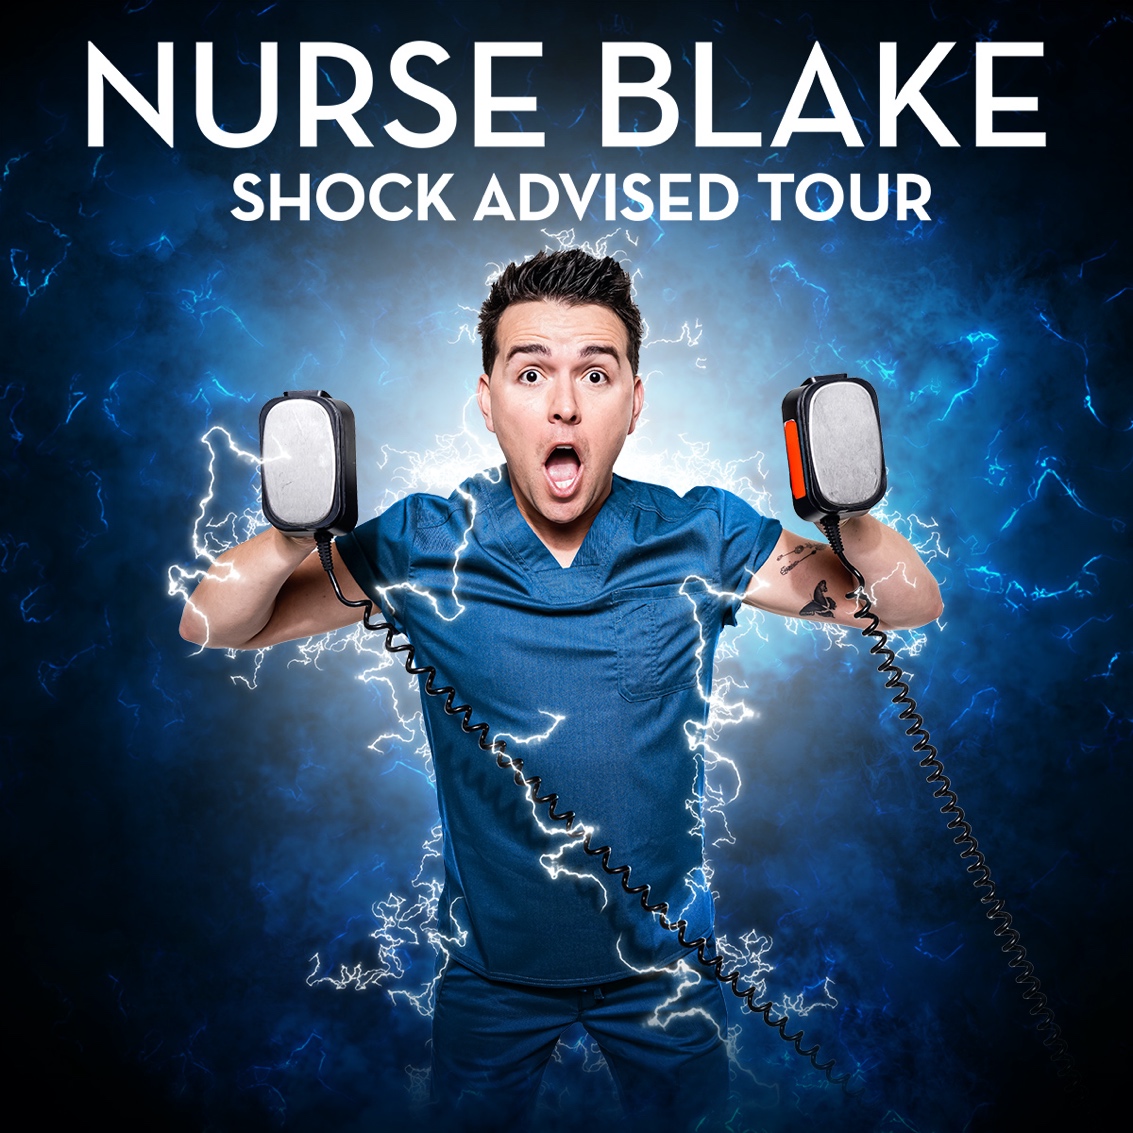 STAND CLEAR! Nurse Blake is coming to the Southern Alberta Jubilee Auditorium on Sept 1 and the Northern Alberta Jubilee Auditorium on Sept 2 and bringing his brand new comedy tour Shock Advised! Don’t miss out and buy your tickets today because this is going to get WILD!